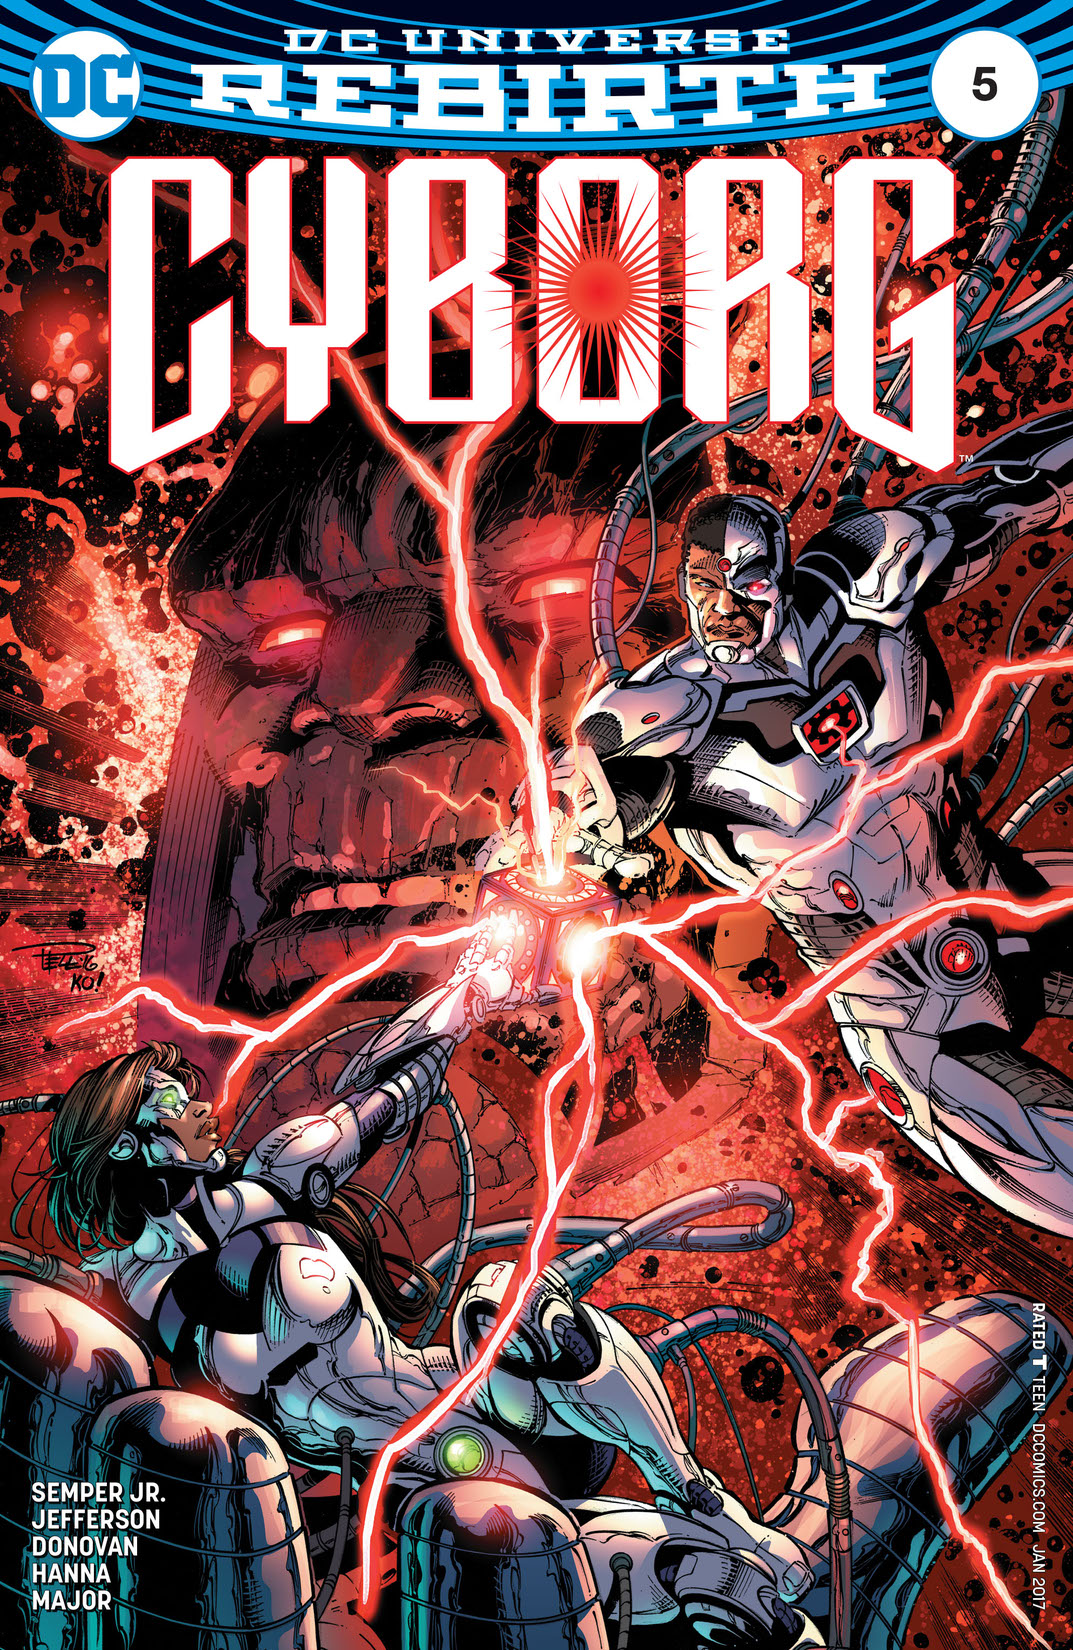 Cyborg (2016-) #5 preview images